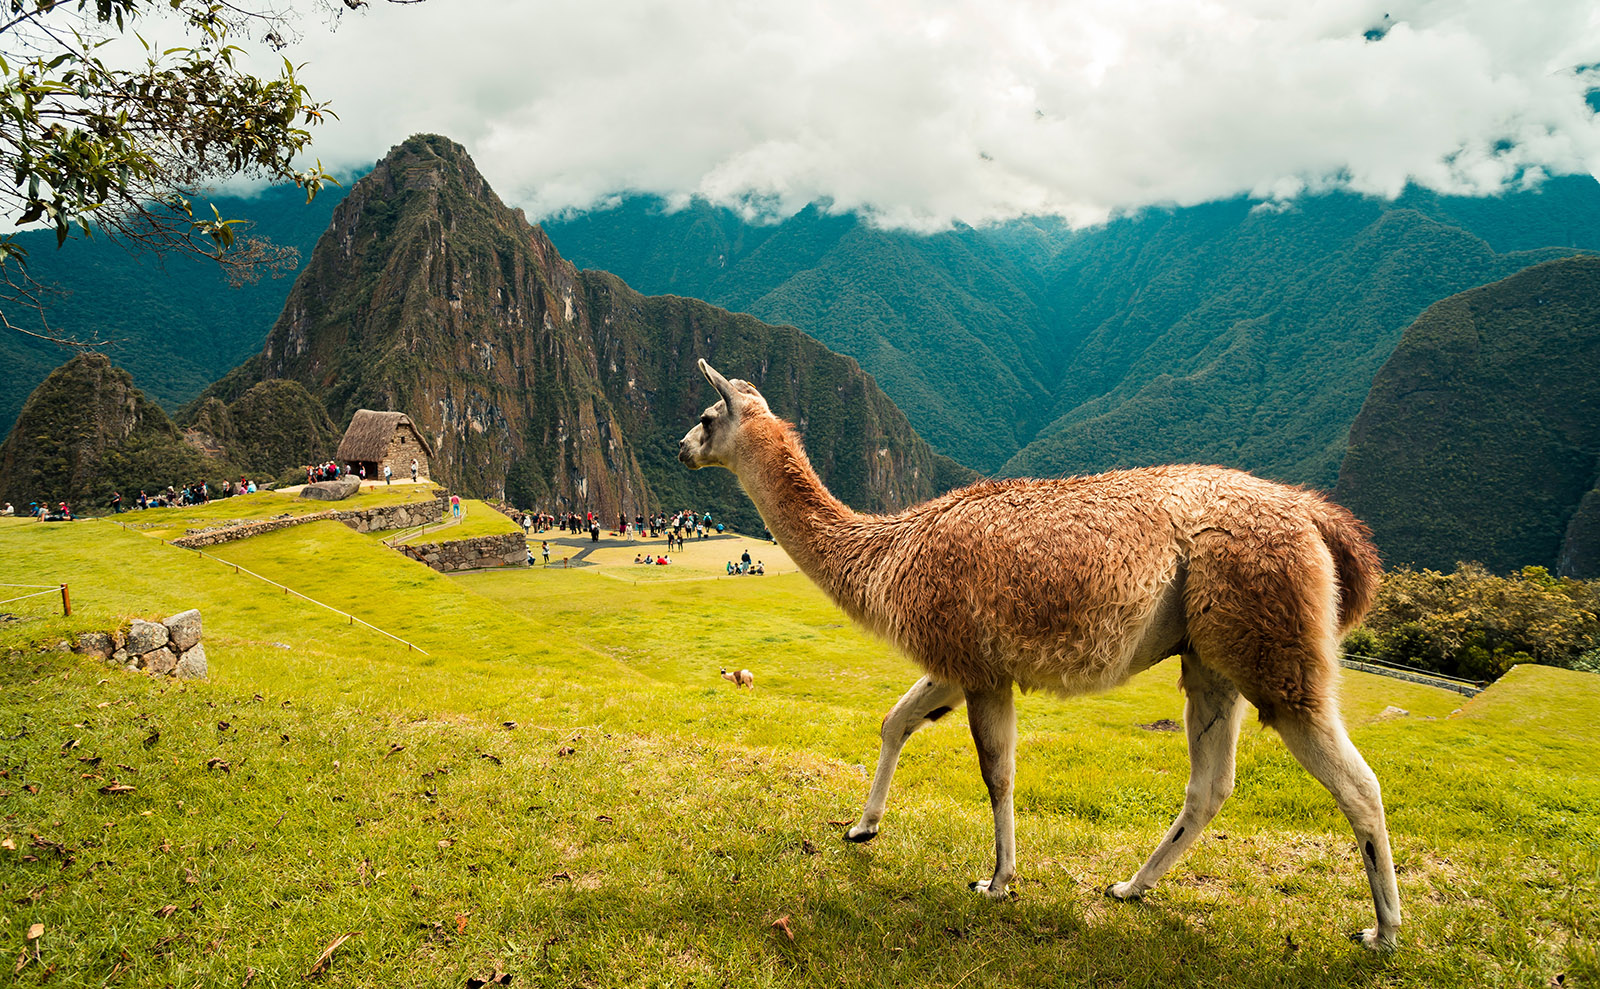 8 Instagrammers That Capture the Mystical Beauty and Luscious Food of Peru